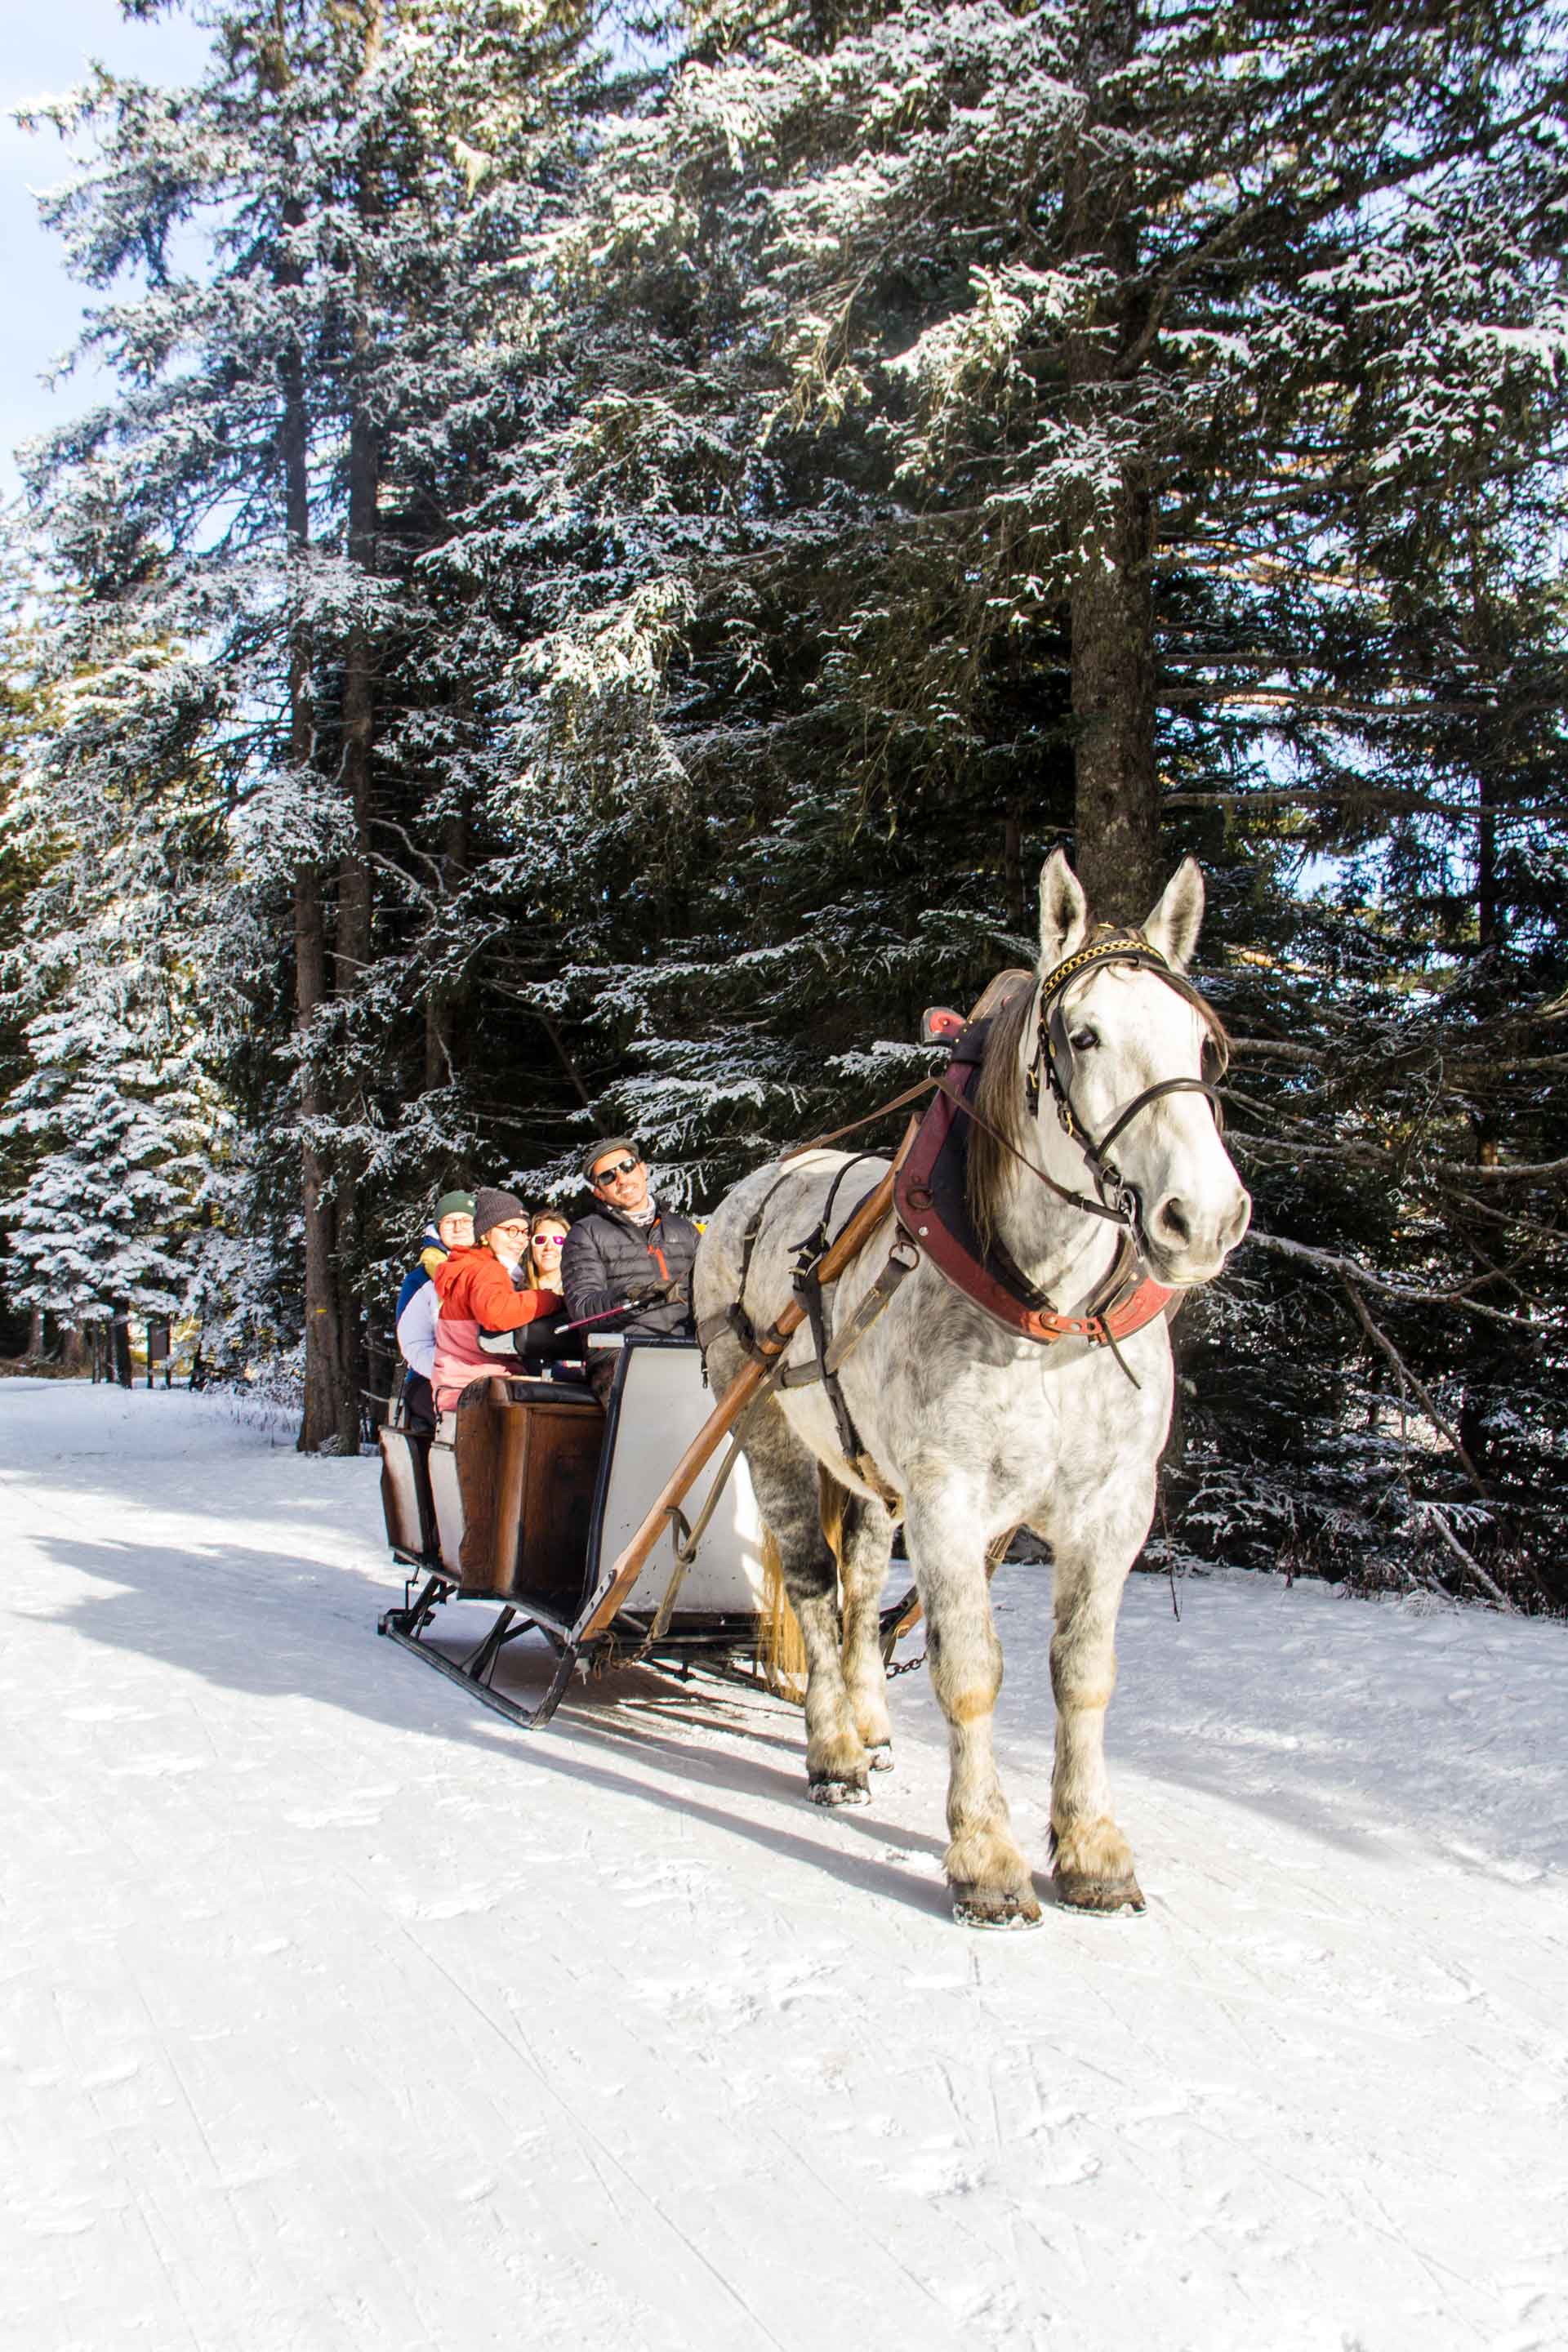 Chamrousse carriage ride activity test arselle plateau nordic area mountain ski resort grenoble isere french alps france - © CH - OT Chamrousse